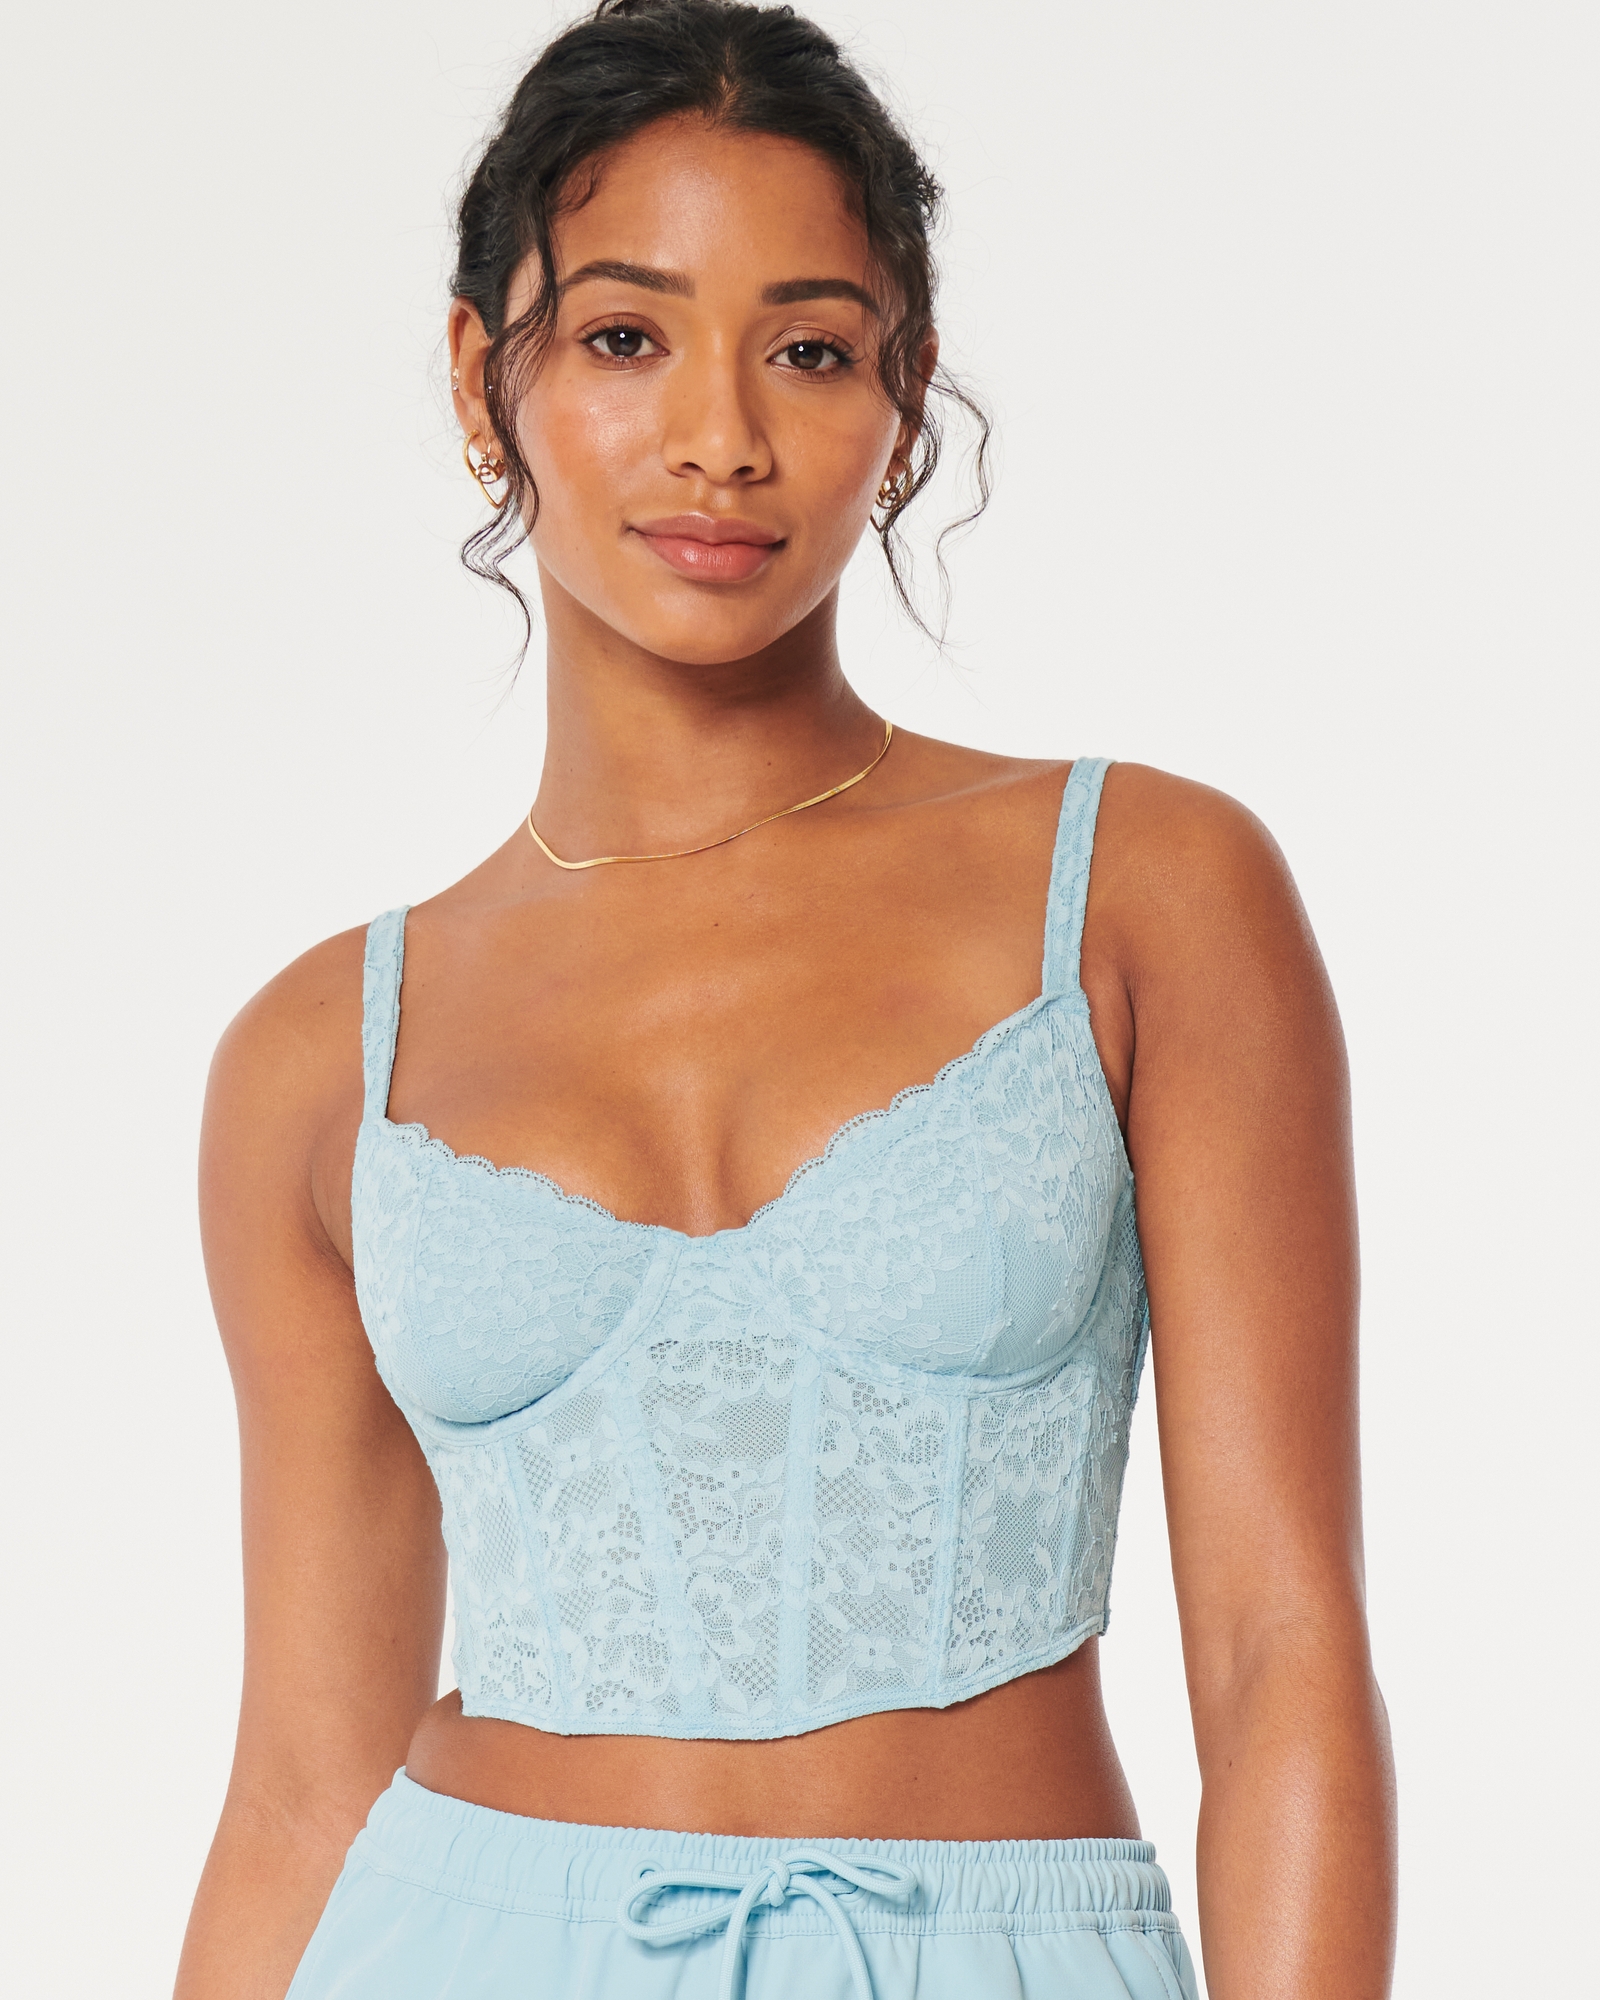 Gilly Hicks fine lace long line bralette